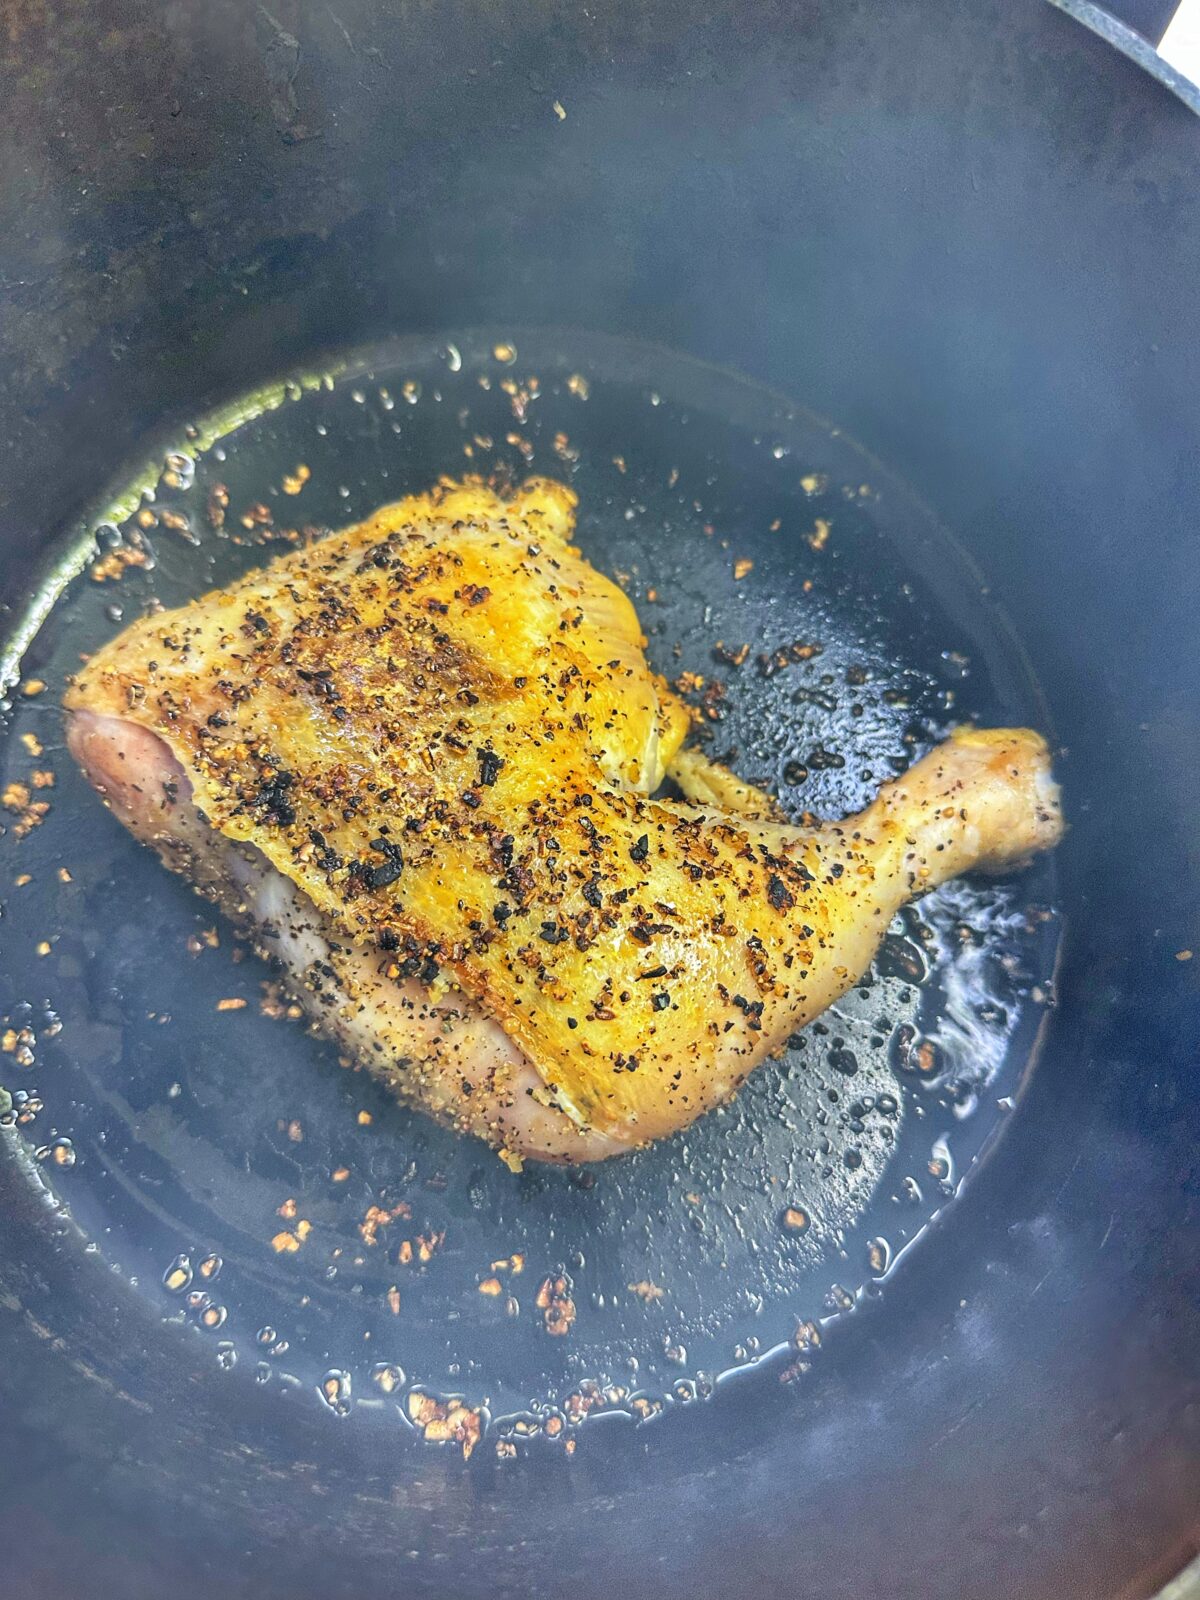 A chicken quarter searing in a cast iron dutch oven.